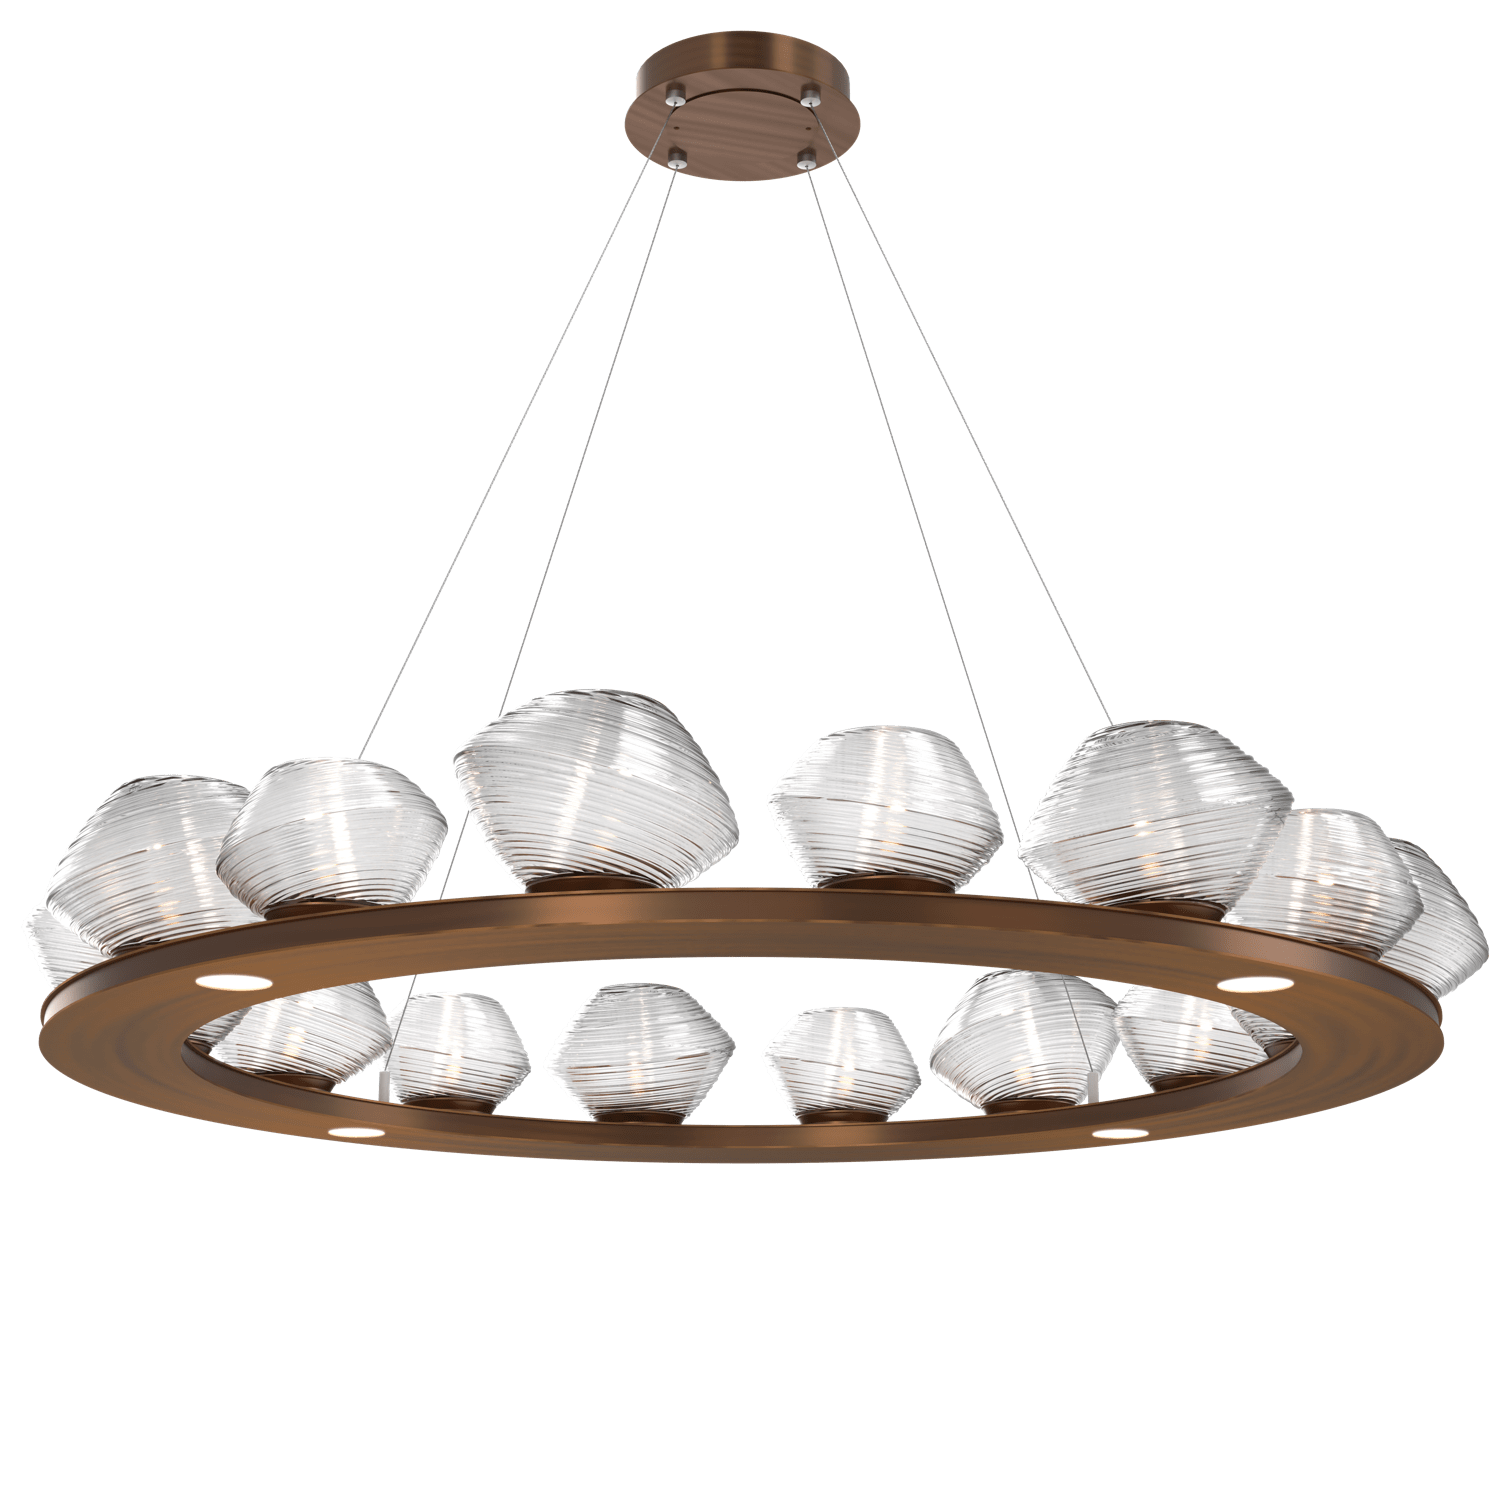 CHB0089-0D-RB-C-Hammerton-Studio-Mesa-48-inch-ring-chandelier-with-oil-rubbed-bronze-finish-and-clear-blown-glass-shades-and-LED-lamping